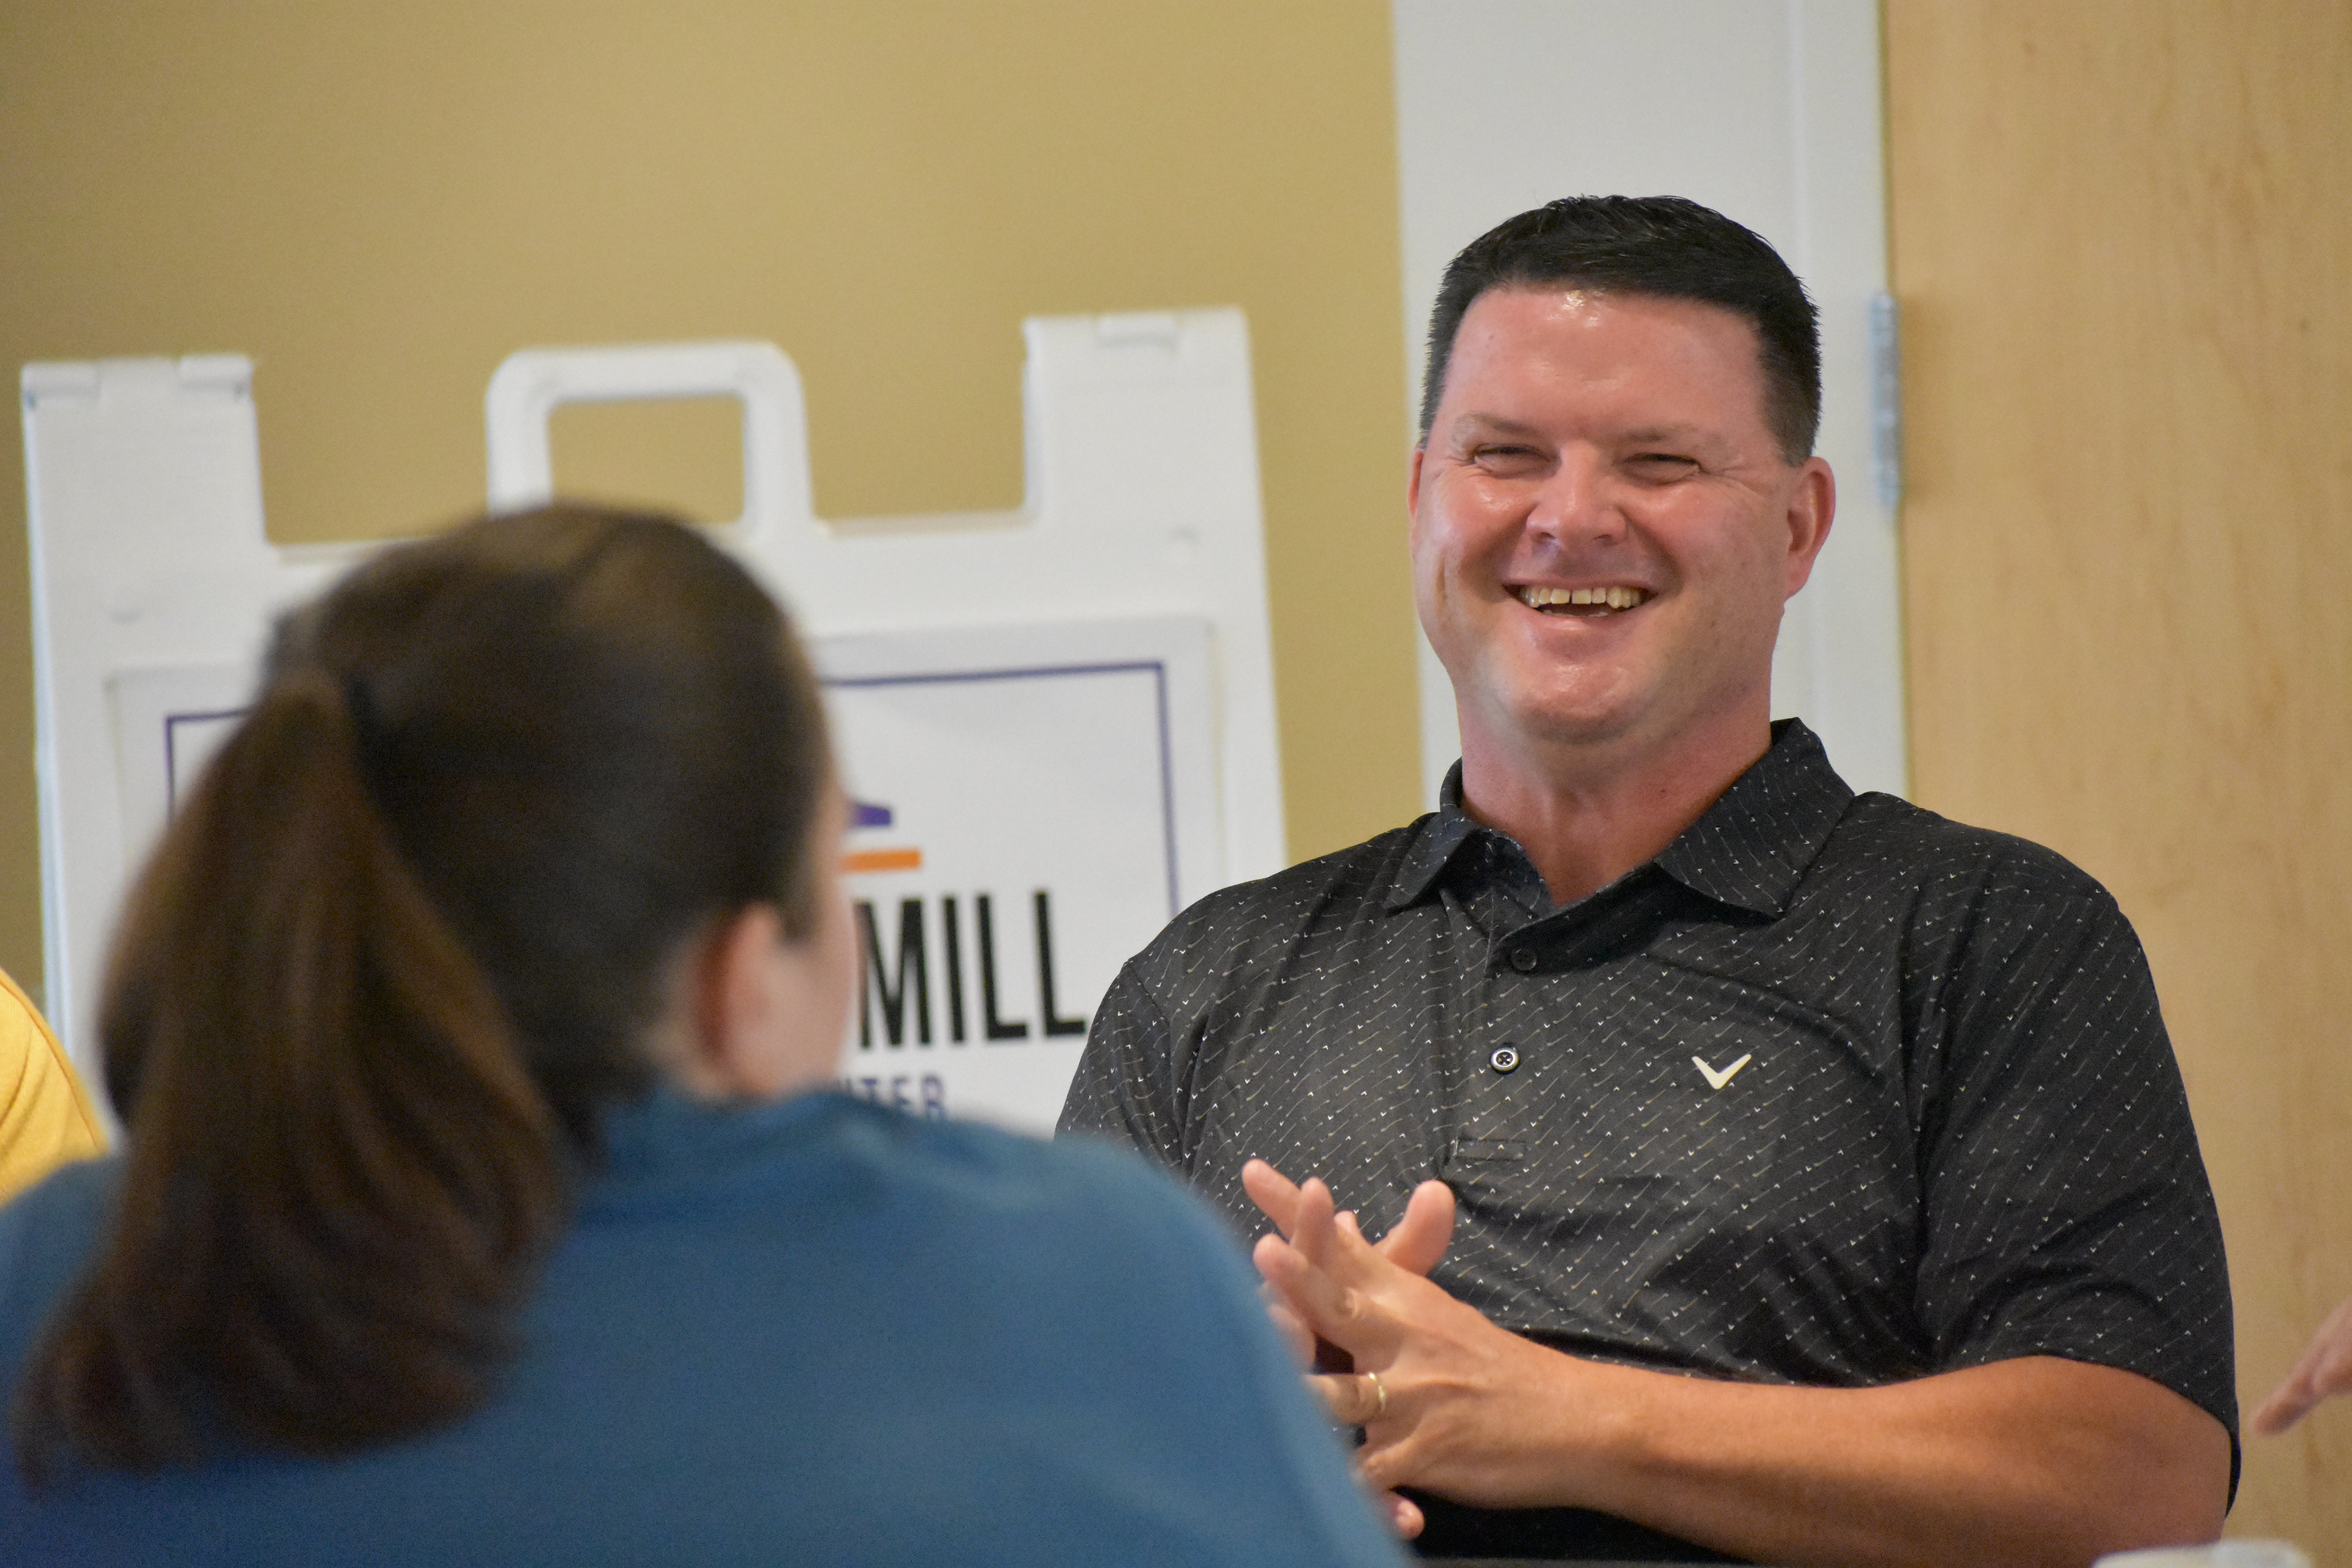 Shawn Wise smiles at Jill Moore while brainstorming ideas for their Building Leaders project | Talent Development Hosts Building Leaders Alumni Event in Cincinnati